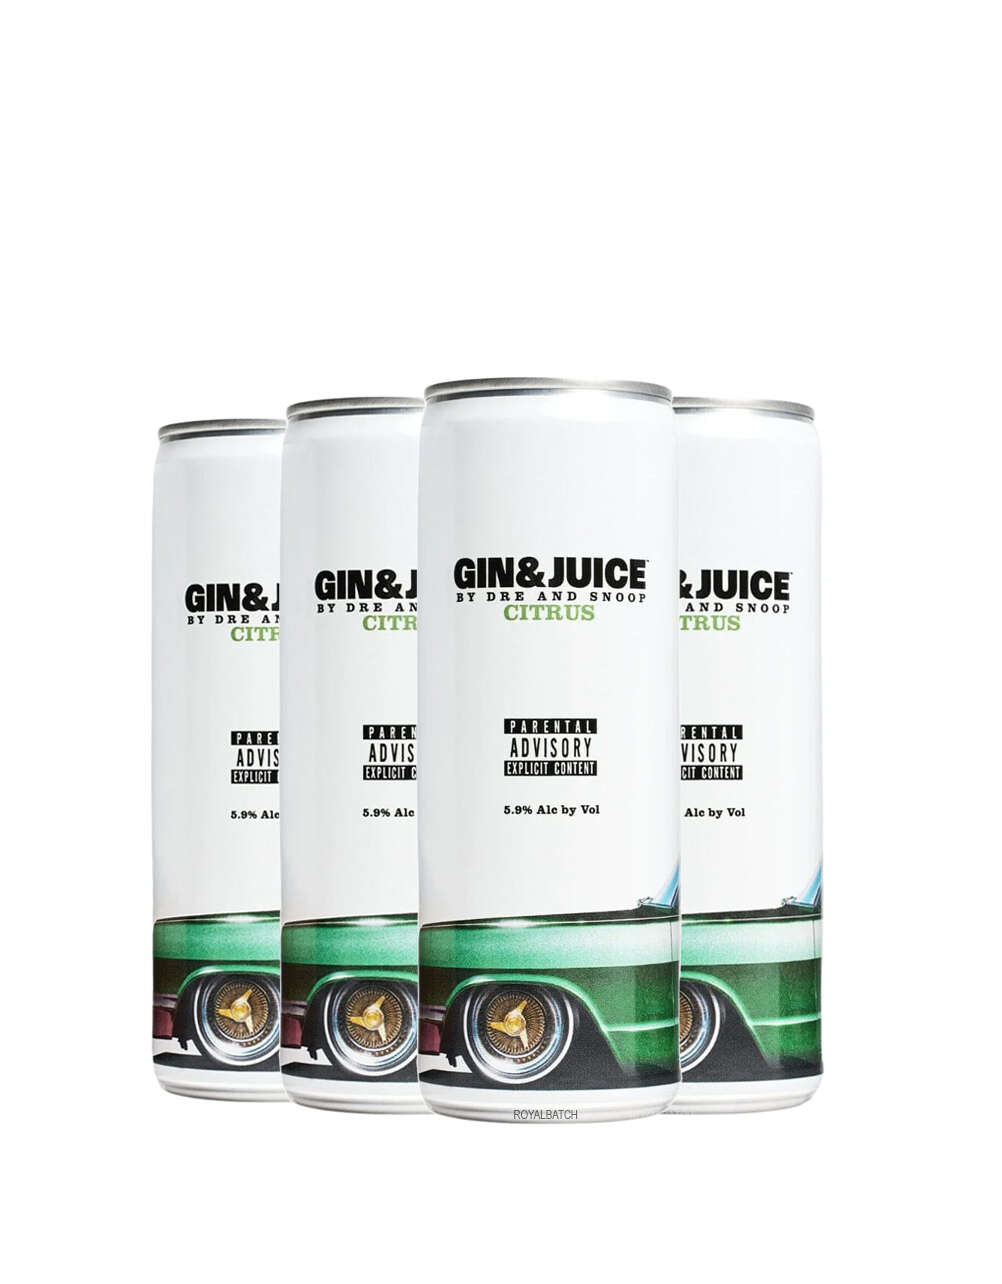 Gin and Juice Citrus by Dre and Snoop 4 Pack of 355ml